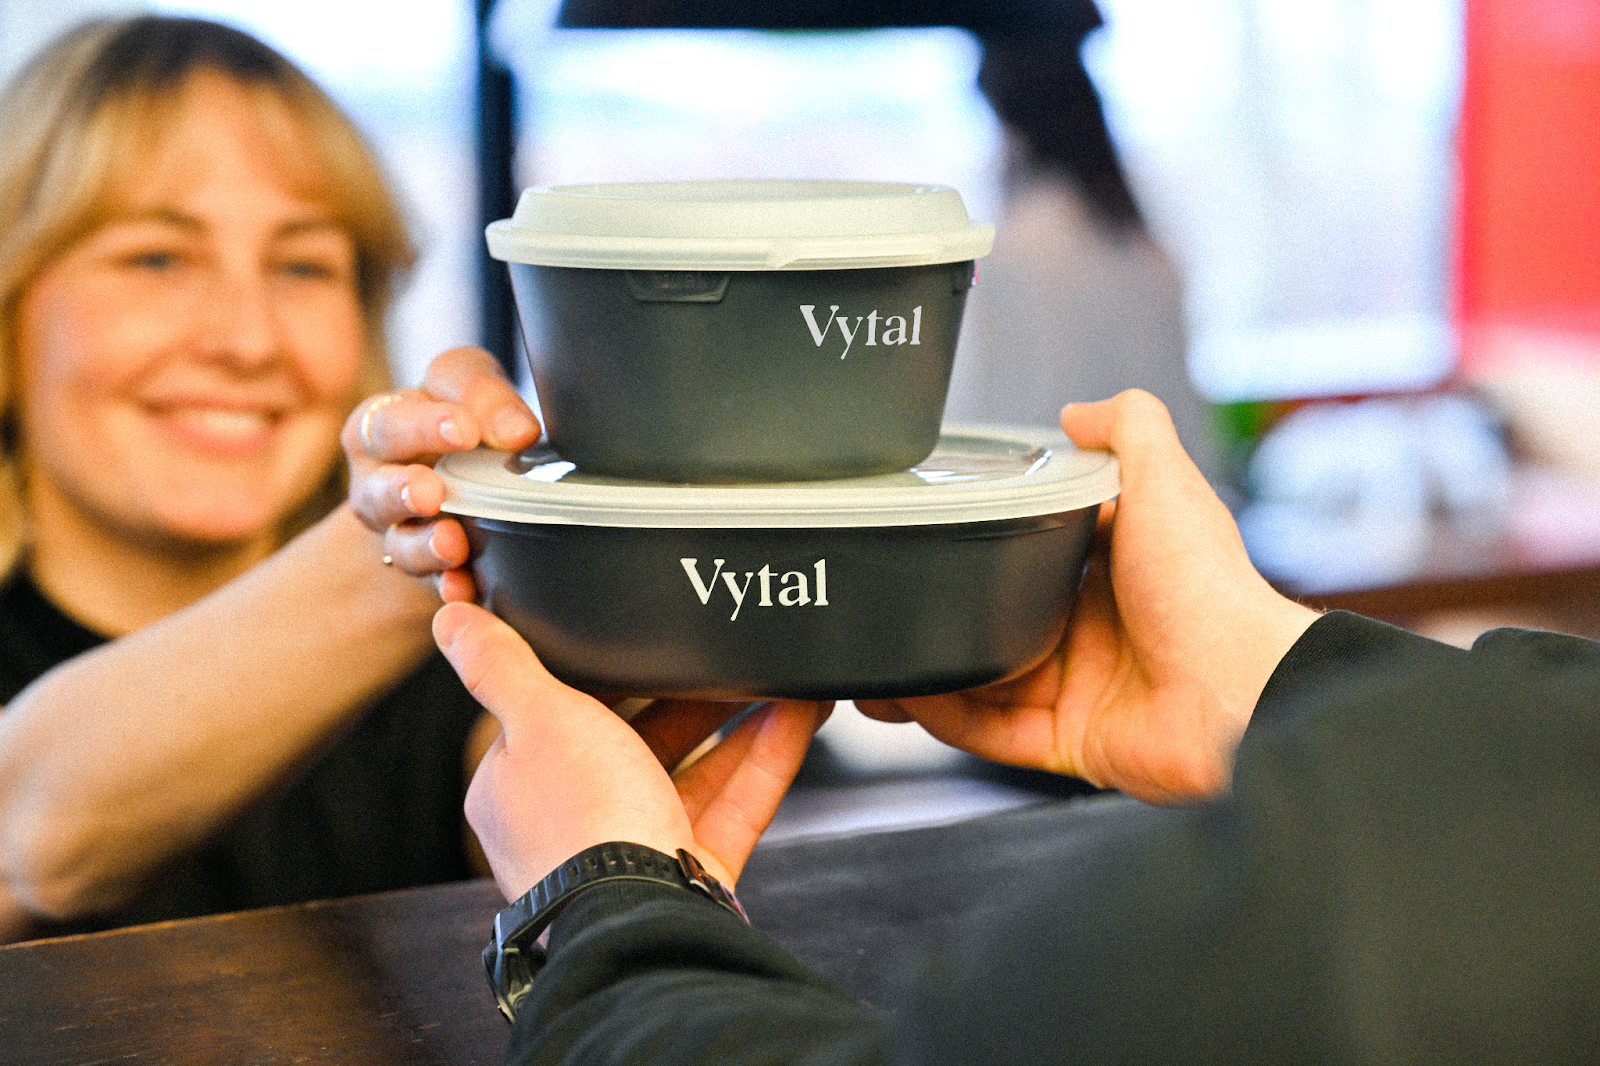 Vytal Enters Hungarian Rebox Market in Cooperation With Wolt